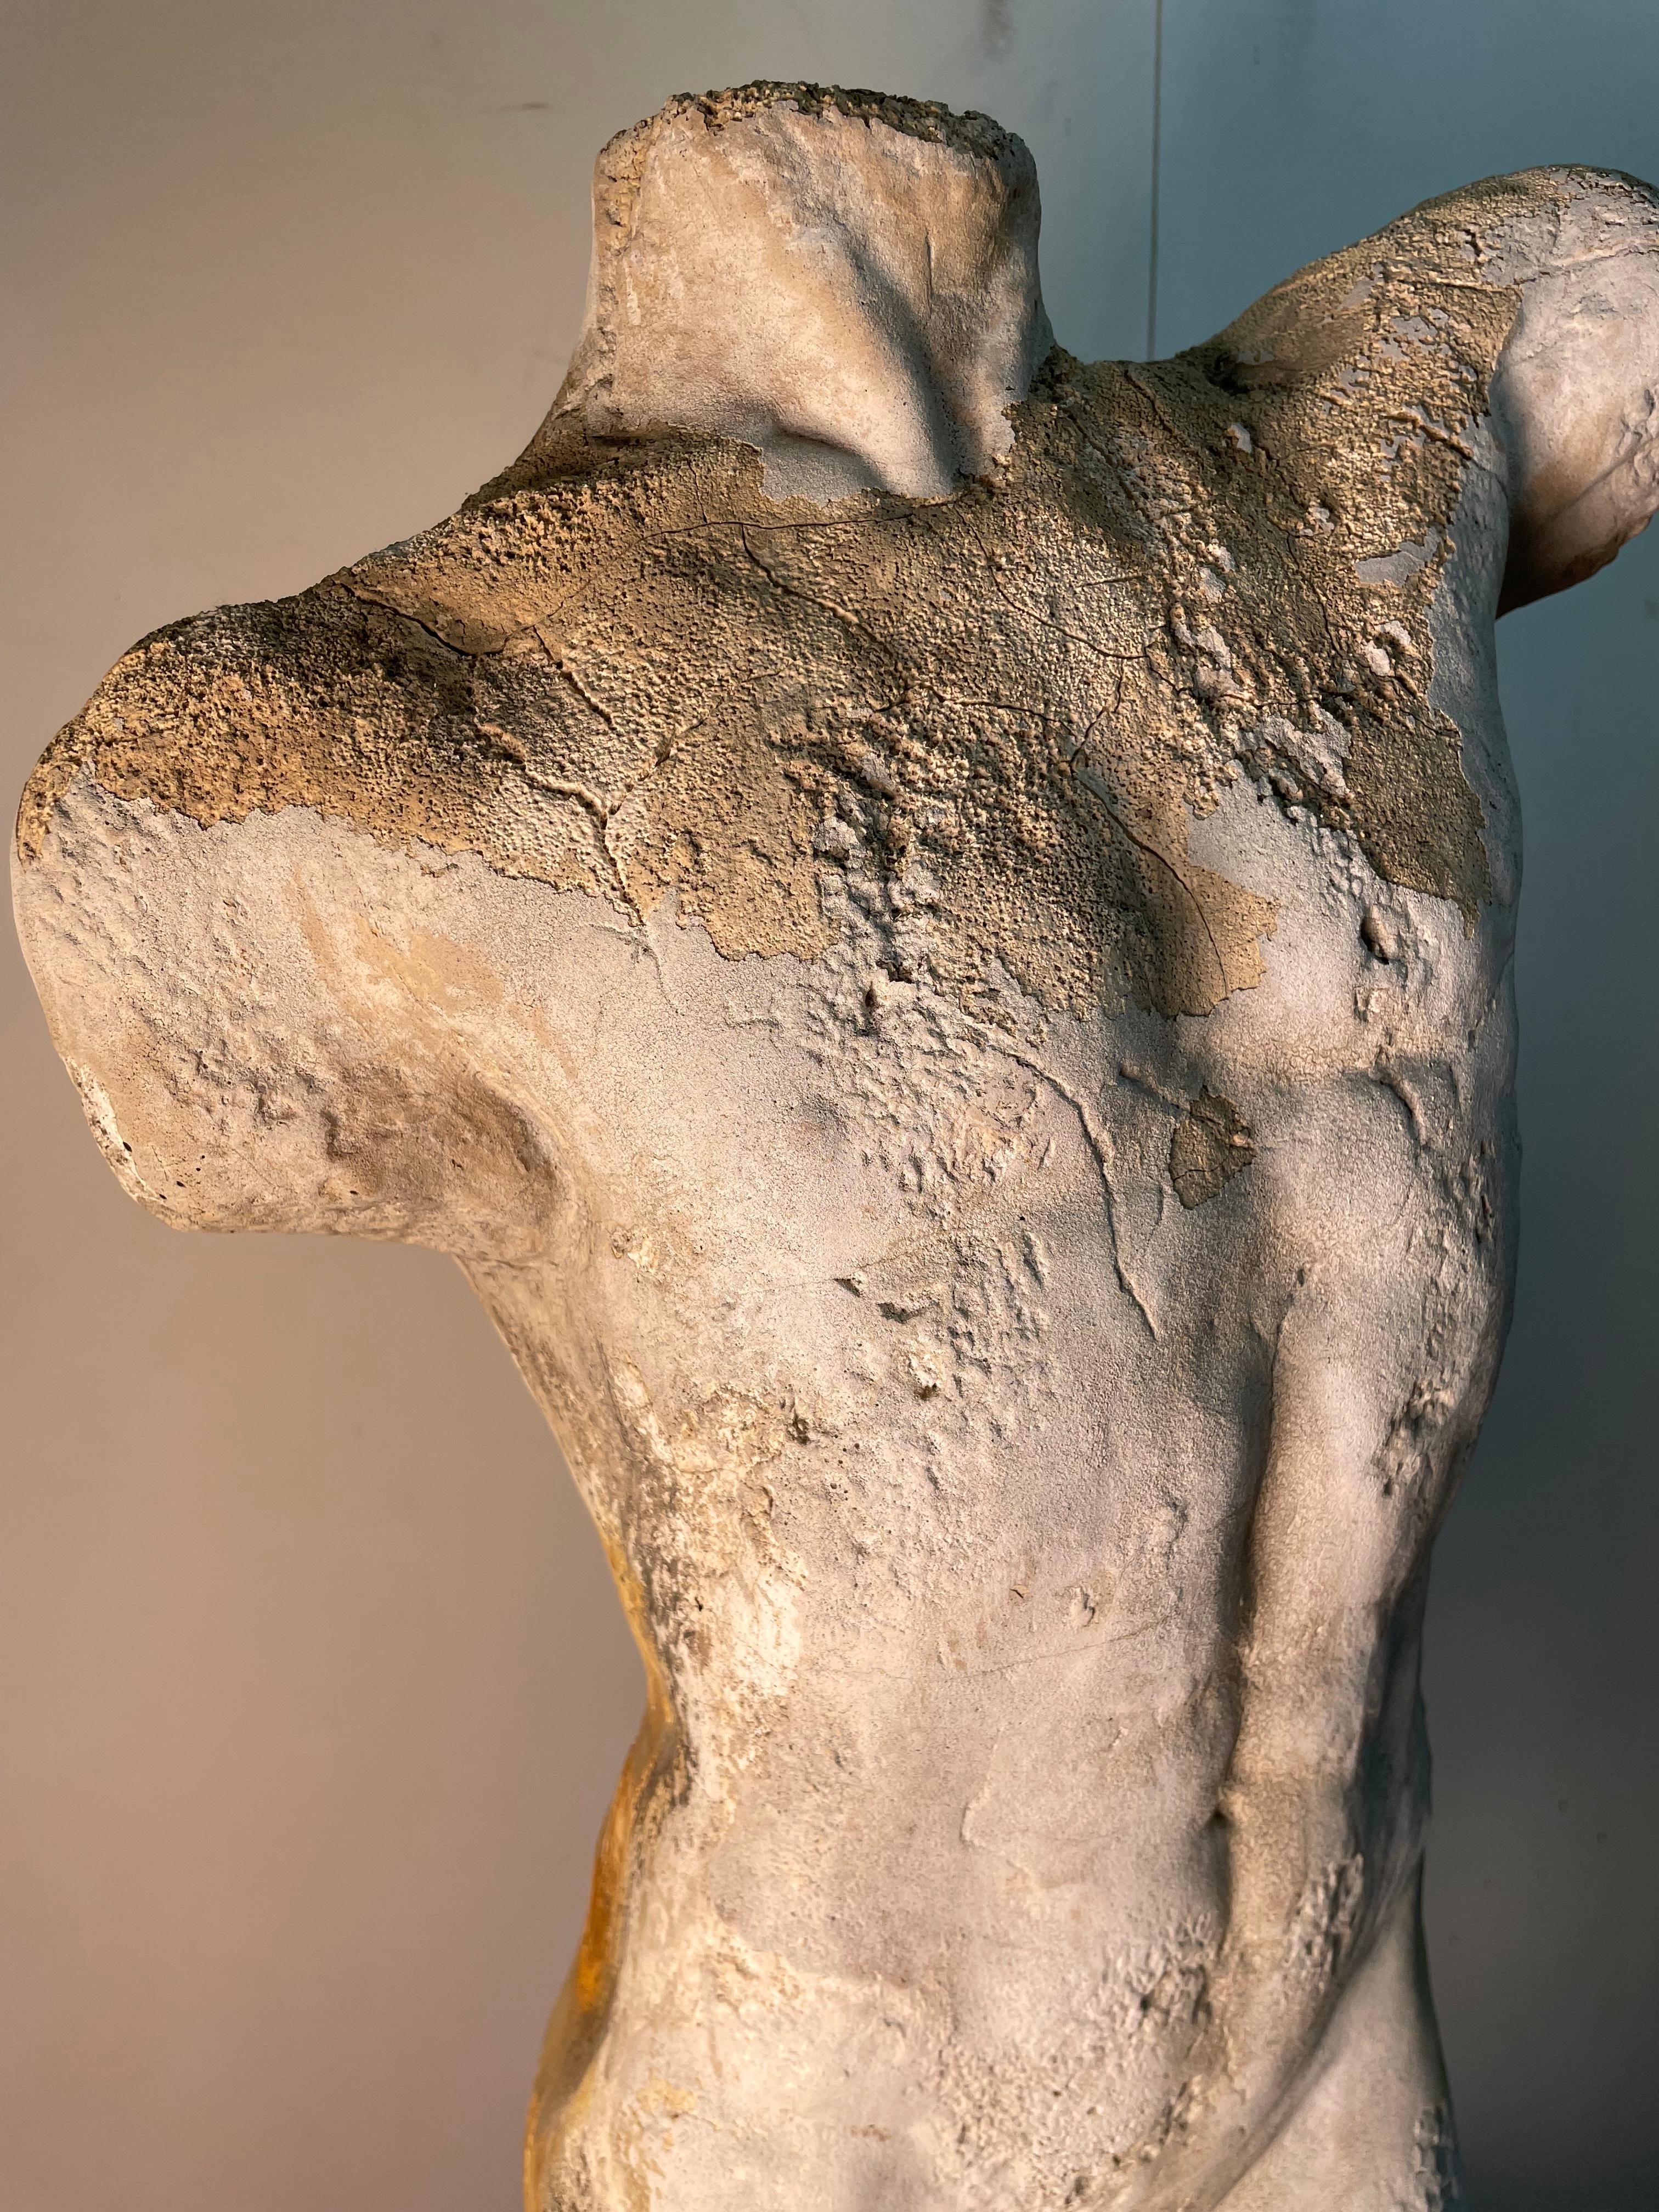 Concrete Naked Sculpture of a male figure made in the 19th century. The ware and tear on the statue gives it an angelic look, yet gives us a reminder of the mortality of man. The cracks in the sculpture can reflect the cracks we all gain throughout